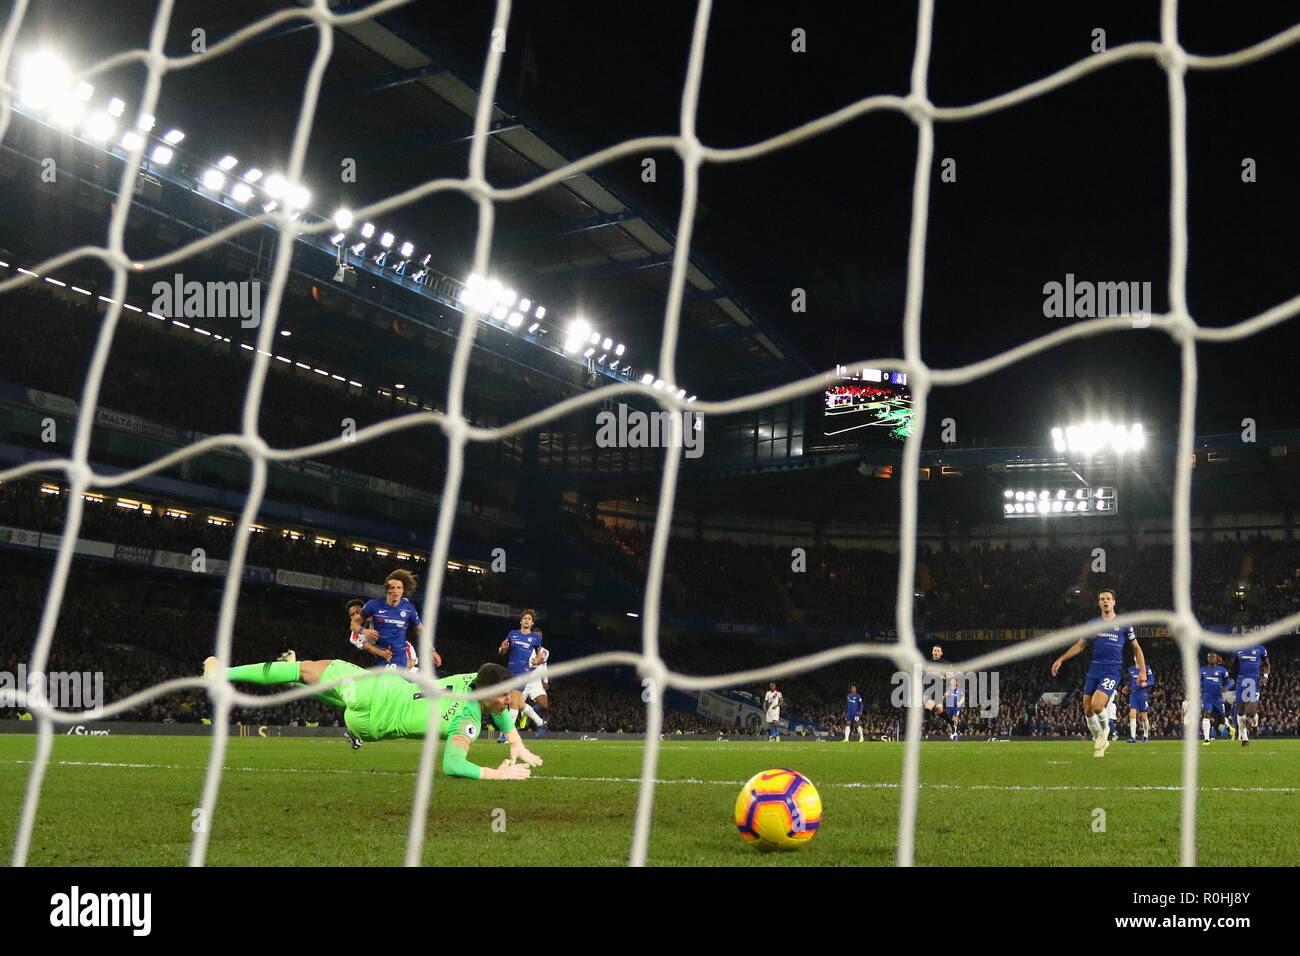 Andros Townsend of Crystal Palace scores the equalising goal, making it 1-1 - Chelsea v Crystal Palace, Premier League, Stamford Bridge, London - 4th November 2018  STRICTLY EDITORIAL USE ONLY - DataCo rules apply - The use of this image in a commercial context is strictly prohibited unless express permission has been given by the club(s) concerned. Examples of commercial usage include, but are not limited to, use in betting and gaming, marketing and advertising products. No use with unauthorised audio, video, data, fixture lists, club and or league logos or services including those listed as  Stock Photo